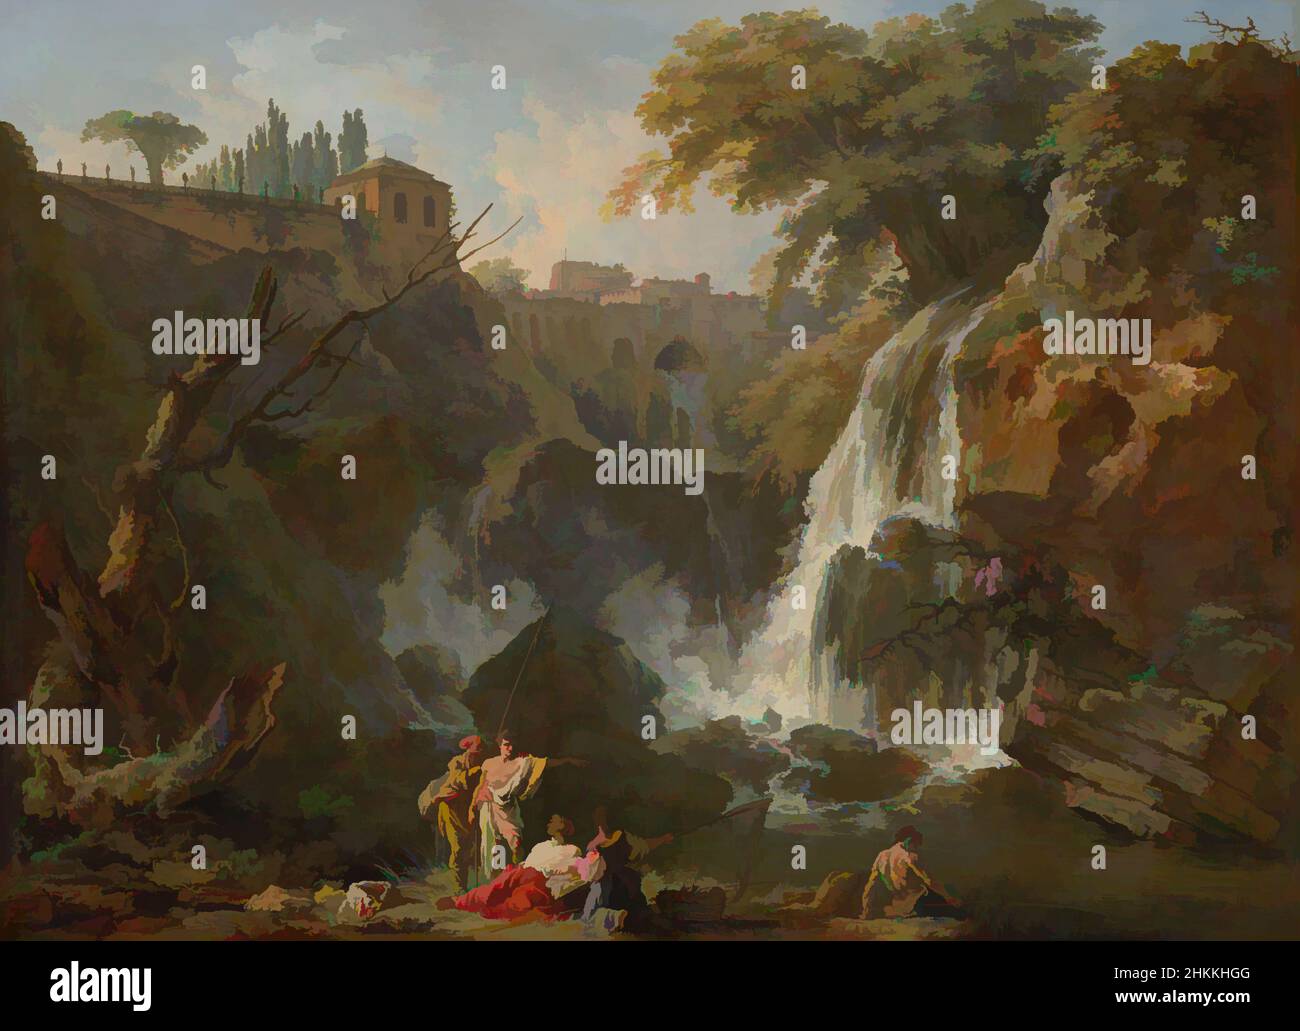 Art inspired by The waterfalls at Tivoli with the villa of Maecenas, Claude-Joseph Vernet, c. 1740 - 1750, Classic works modernized by Artotop with a splash of modernity. Shapes, color and value, eye-catching visual impact on art. Emotions through freedom of artworks in a contemporary way. A timeless message pursuing a wildly creative new direction. Artists turning to the digital medium and creating the Artotop NFT Stock Photo